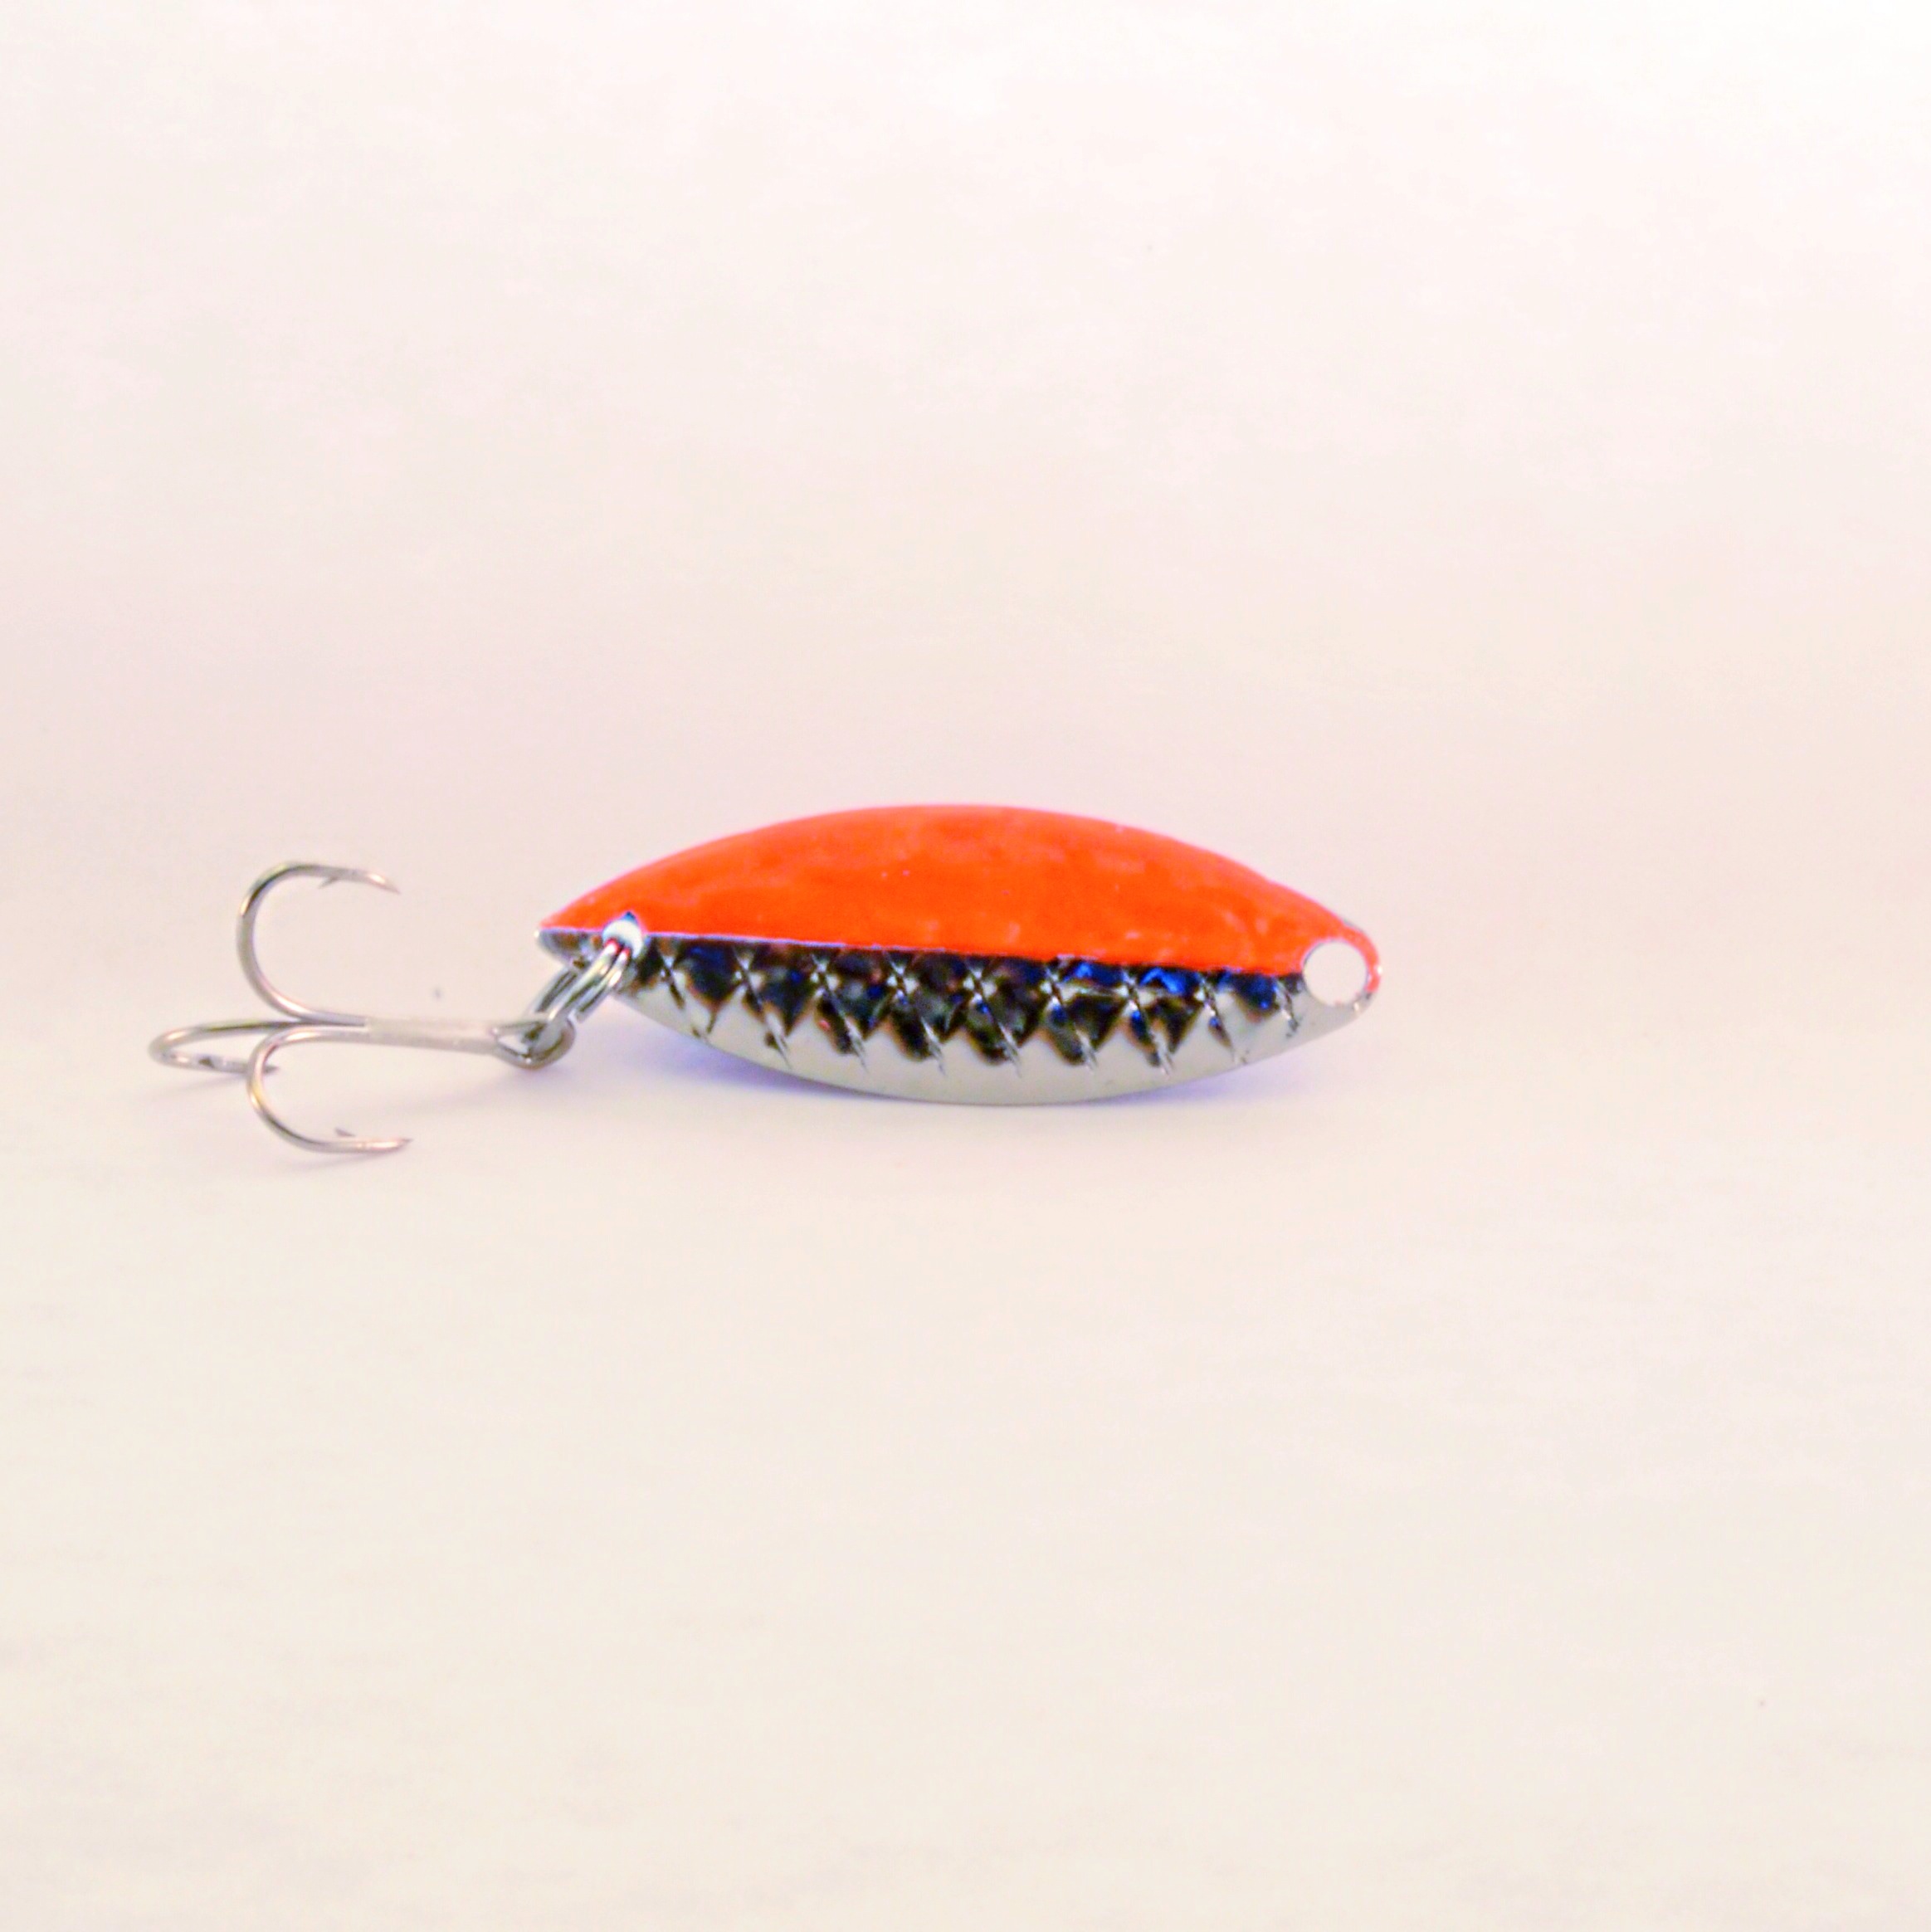 Fire and Ice UV - Flashy Fish Lures